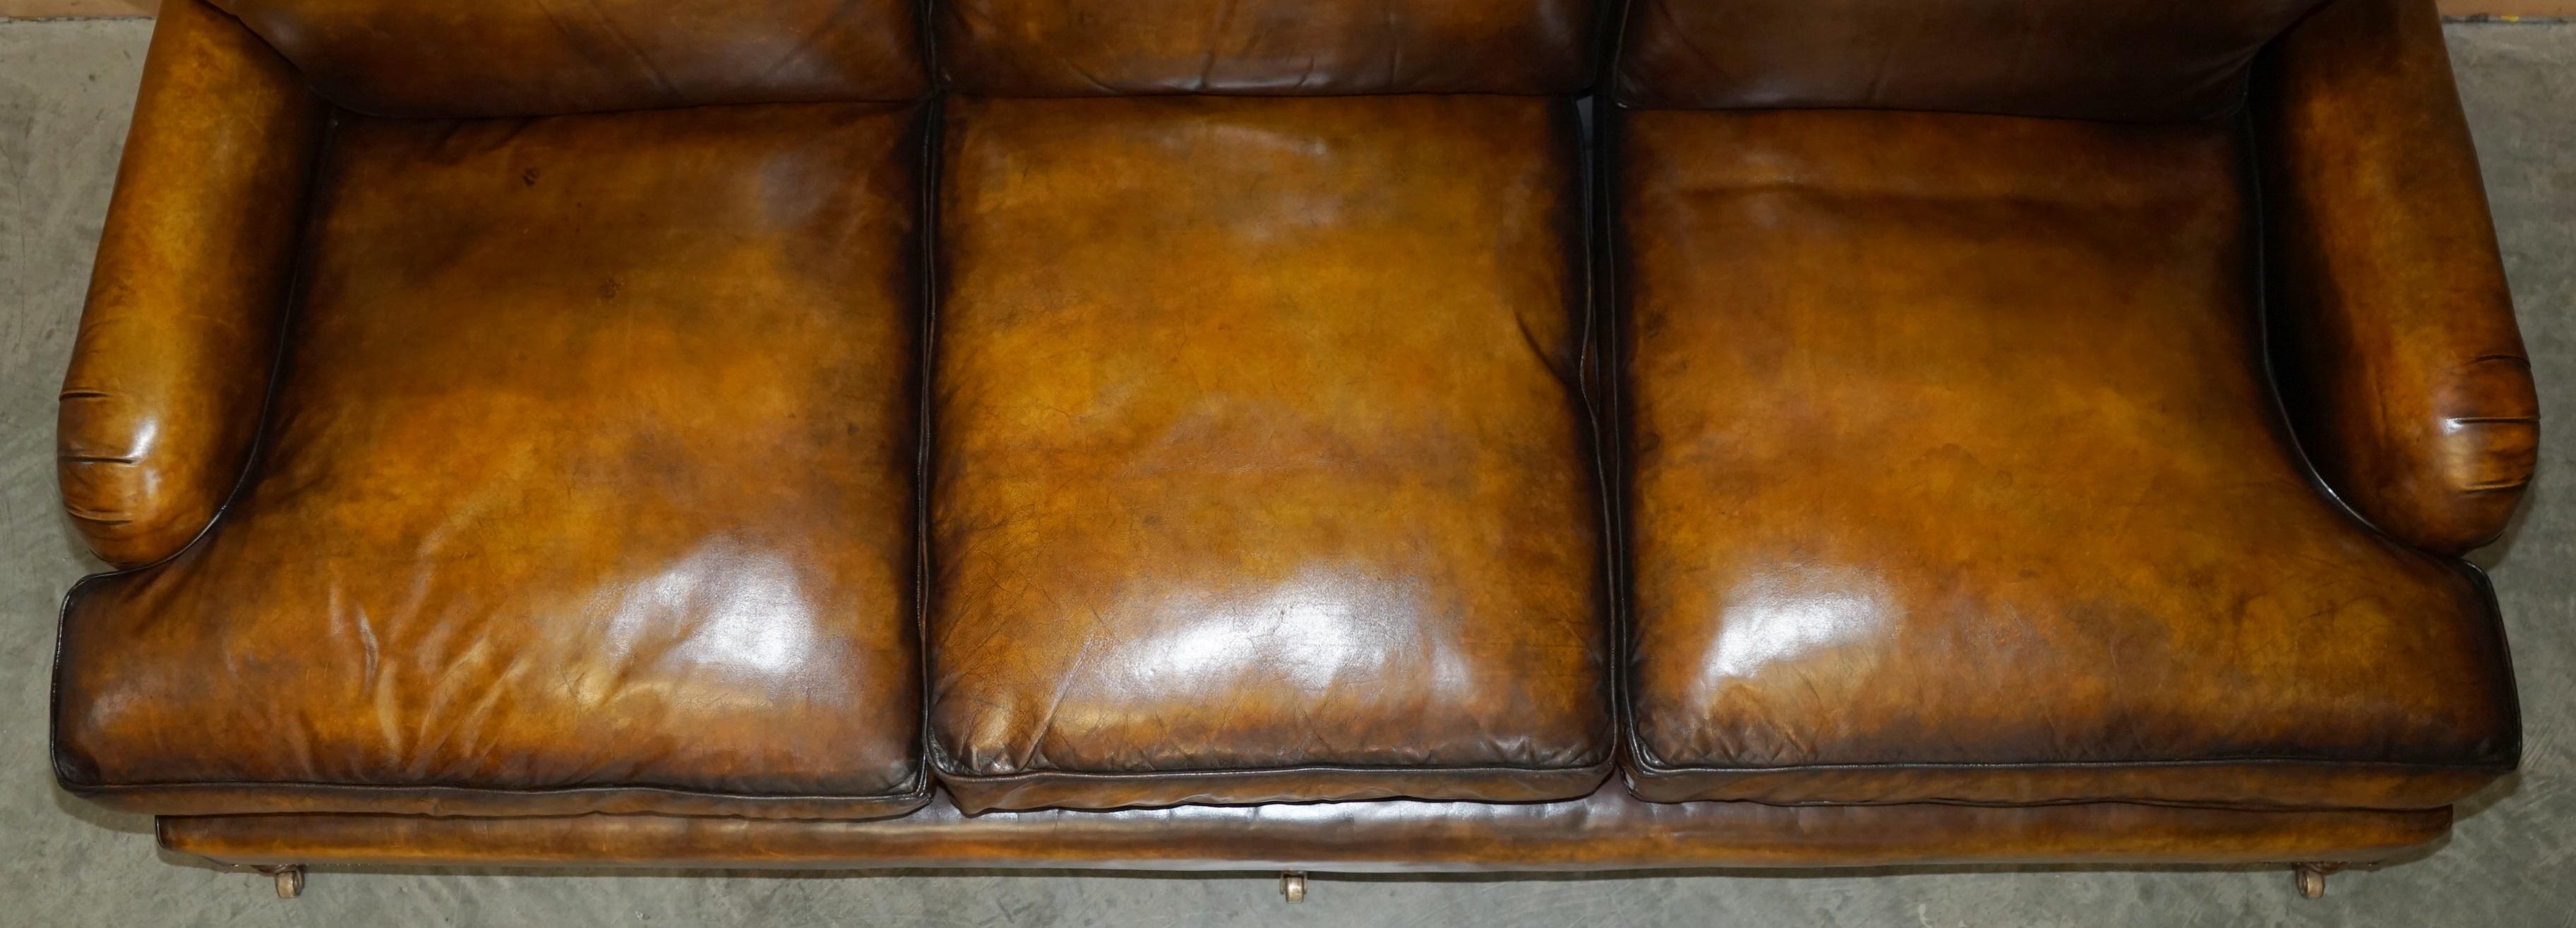 GEORGE SMITH RESTORED HOWARD & SON'S BROWN LEATHER SCROLL ARM SOFA en vente 8